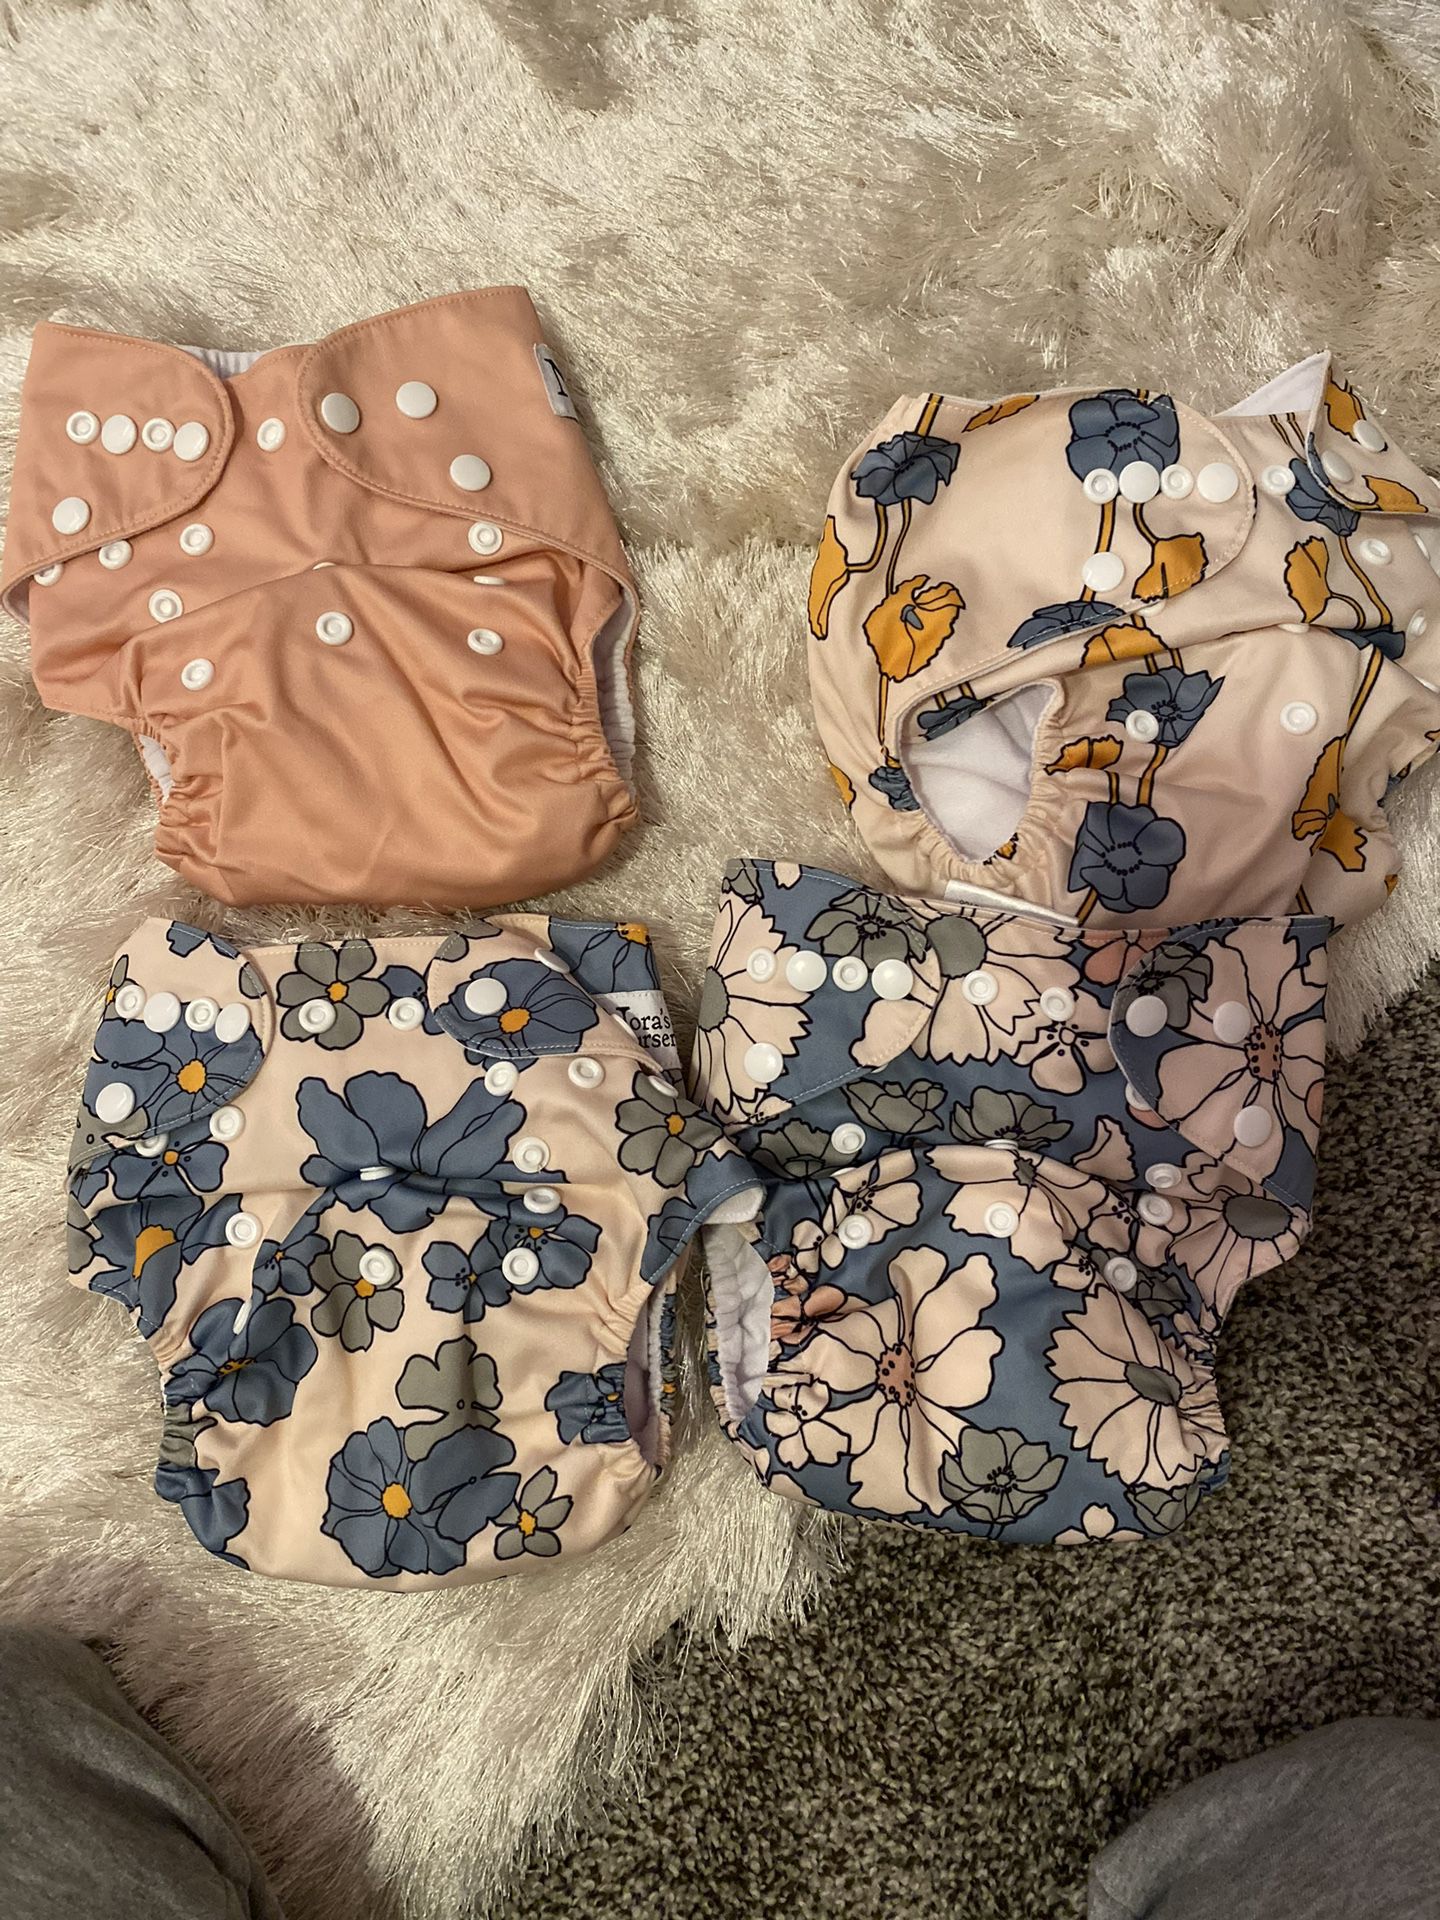 Nora’s Nursery Cloth Diapers with inserts 